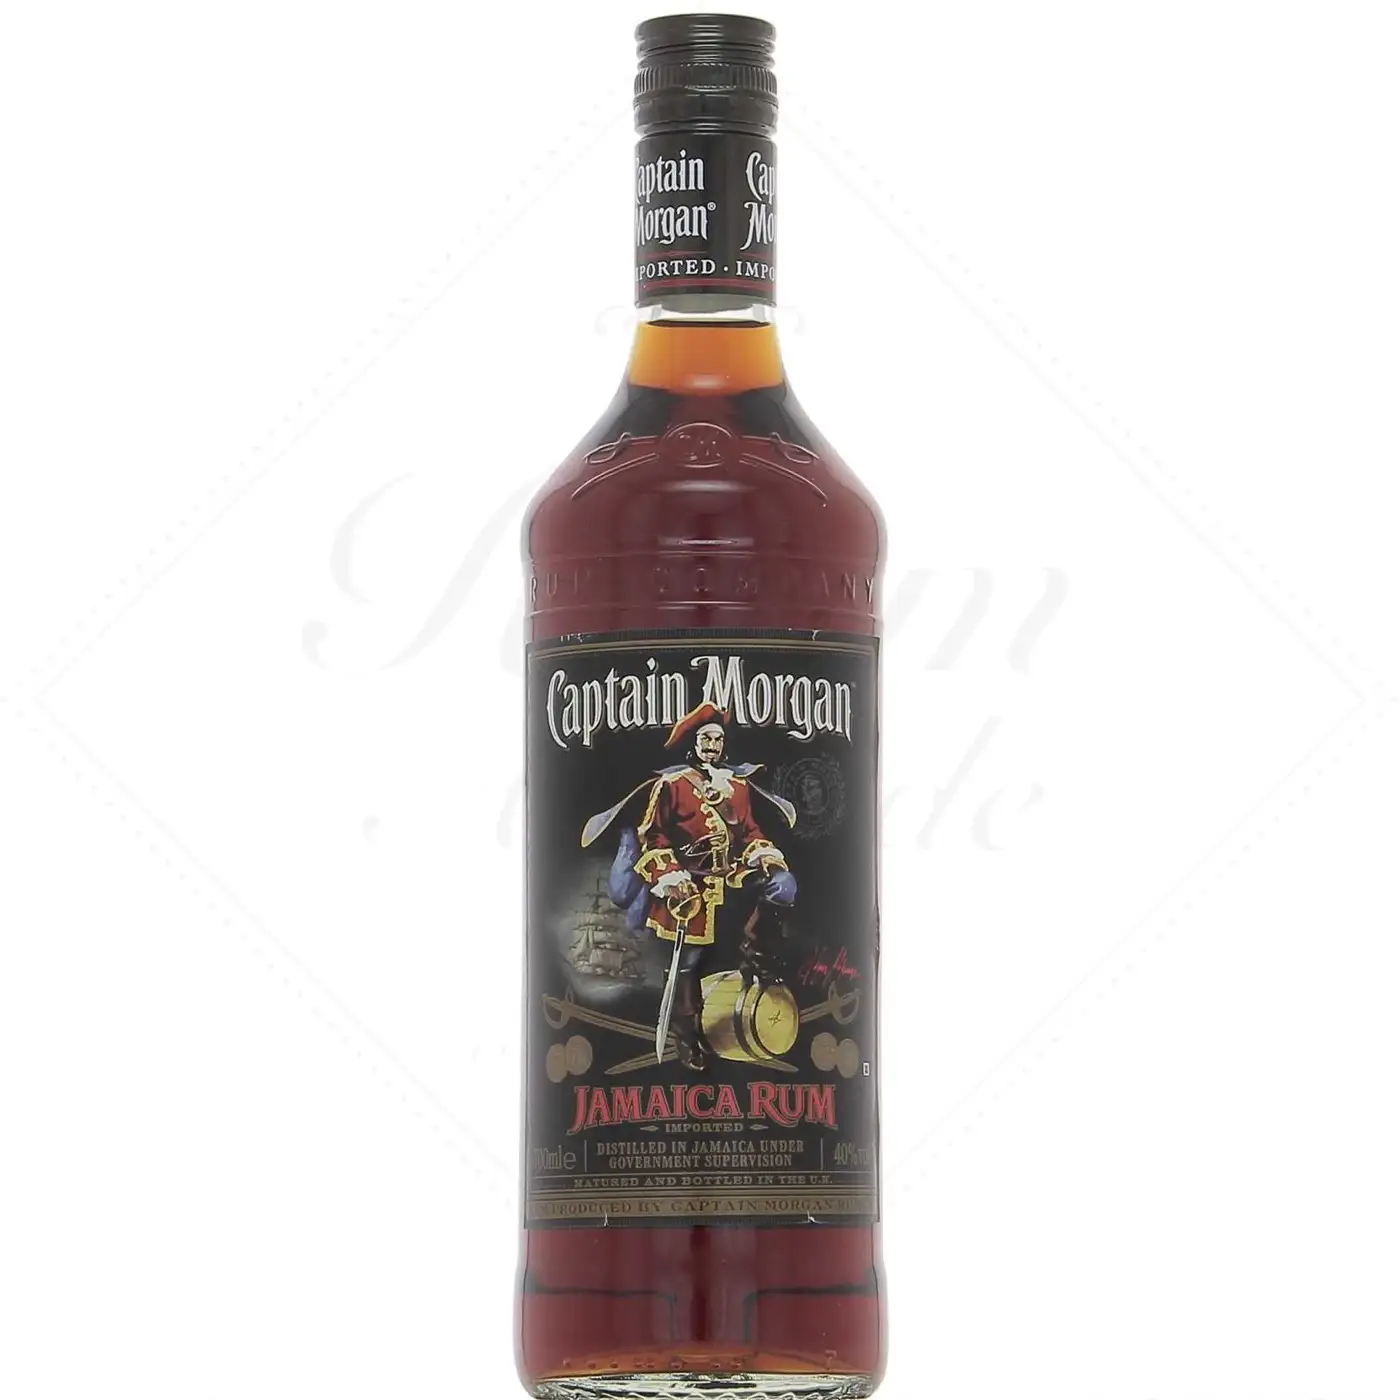 Image of the front of the bottle of the rum Captain Morgan Black Label Jamaica Rum